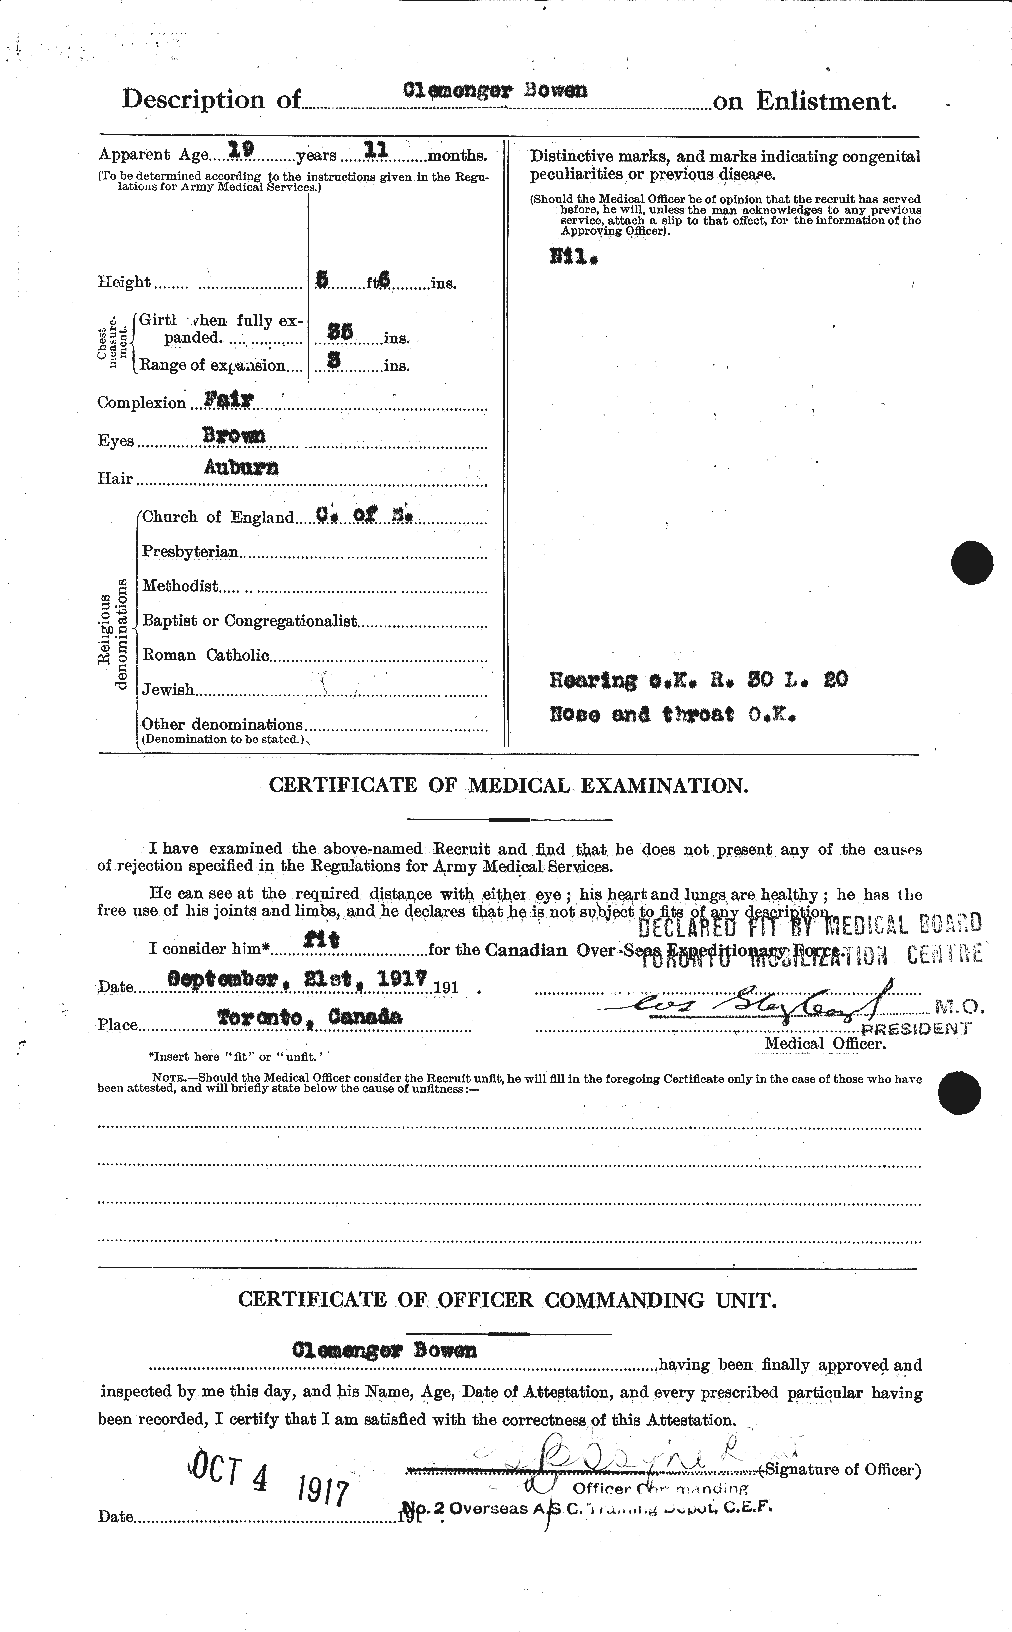 Personnel Records of the First World War - CEF 255369b